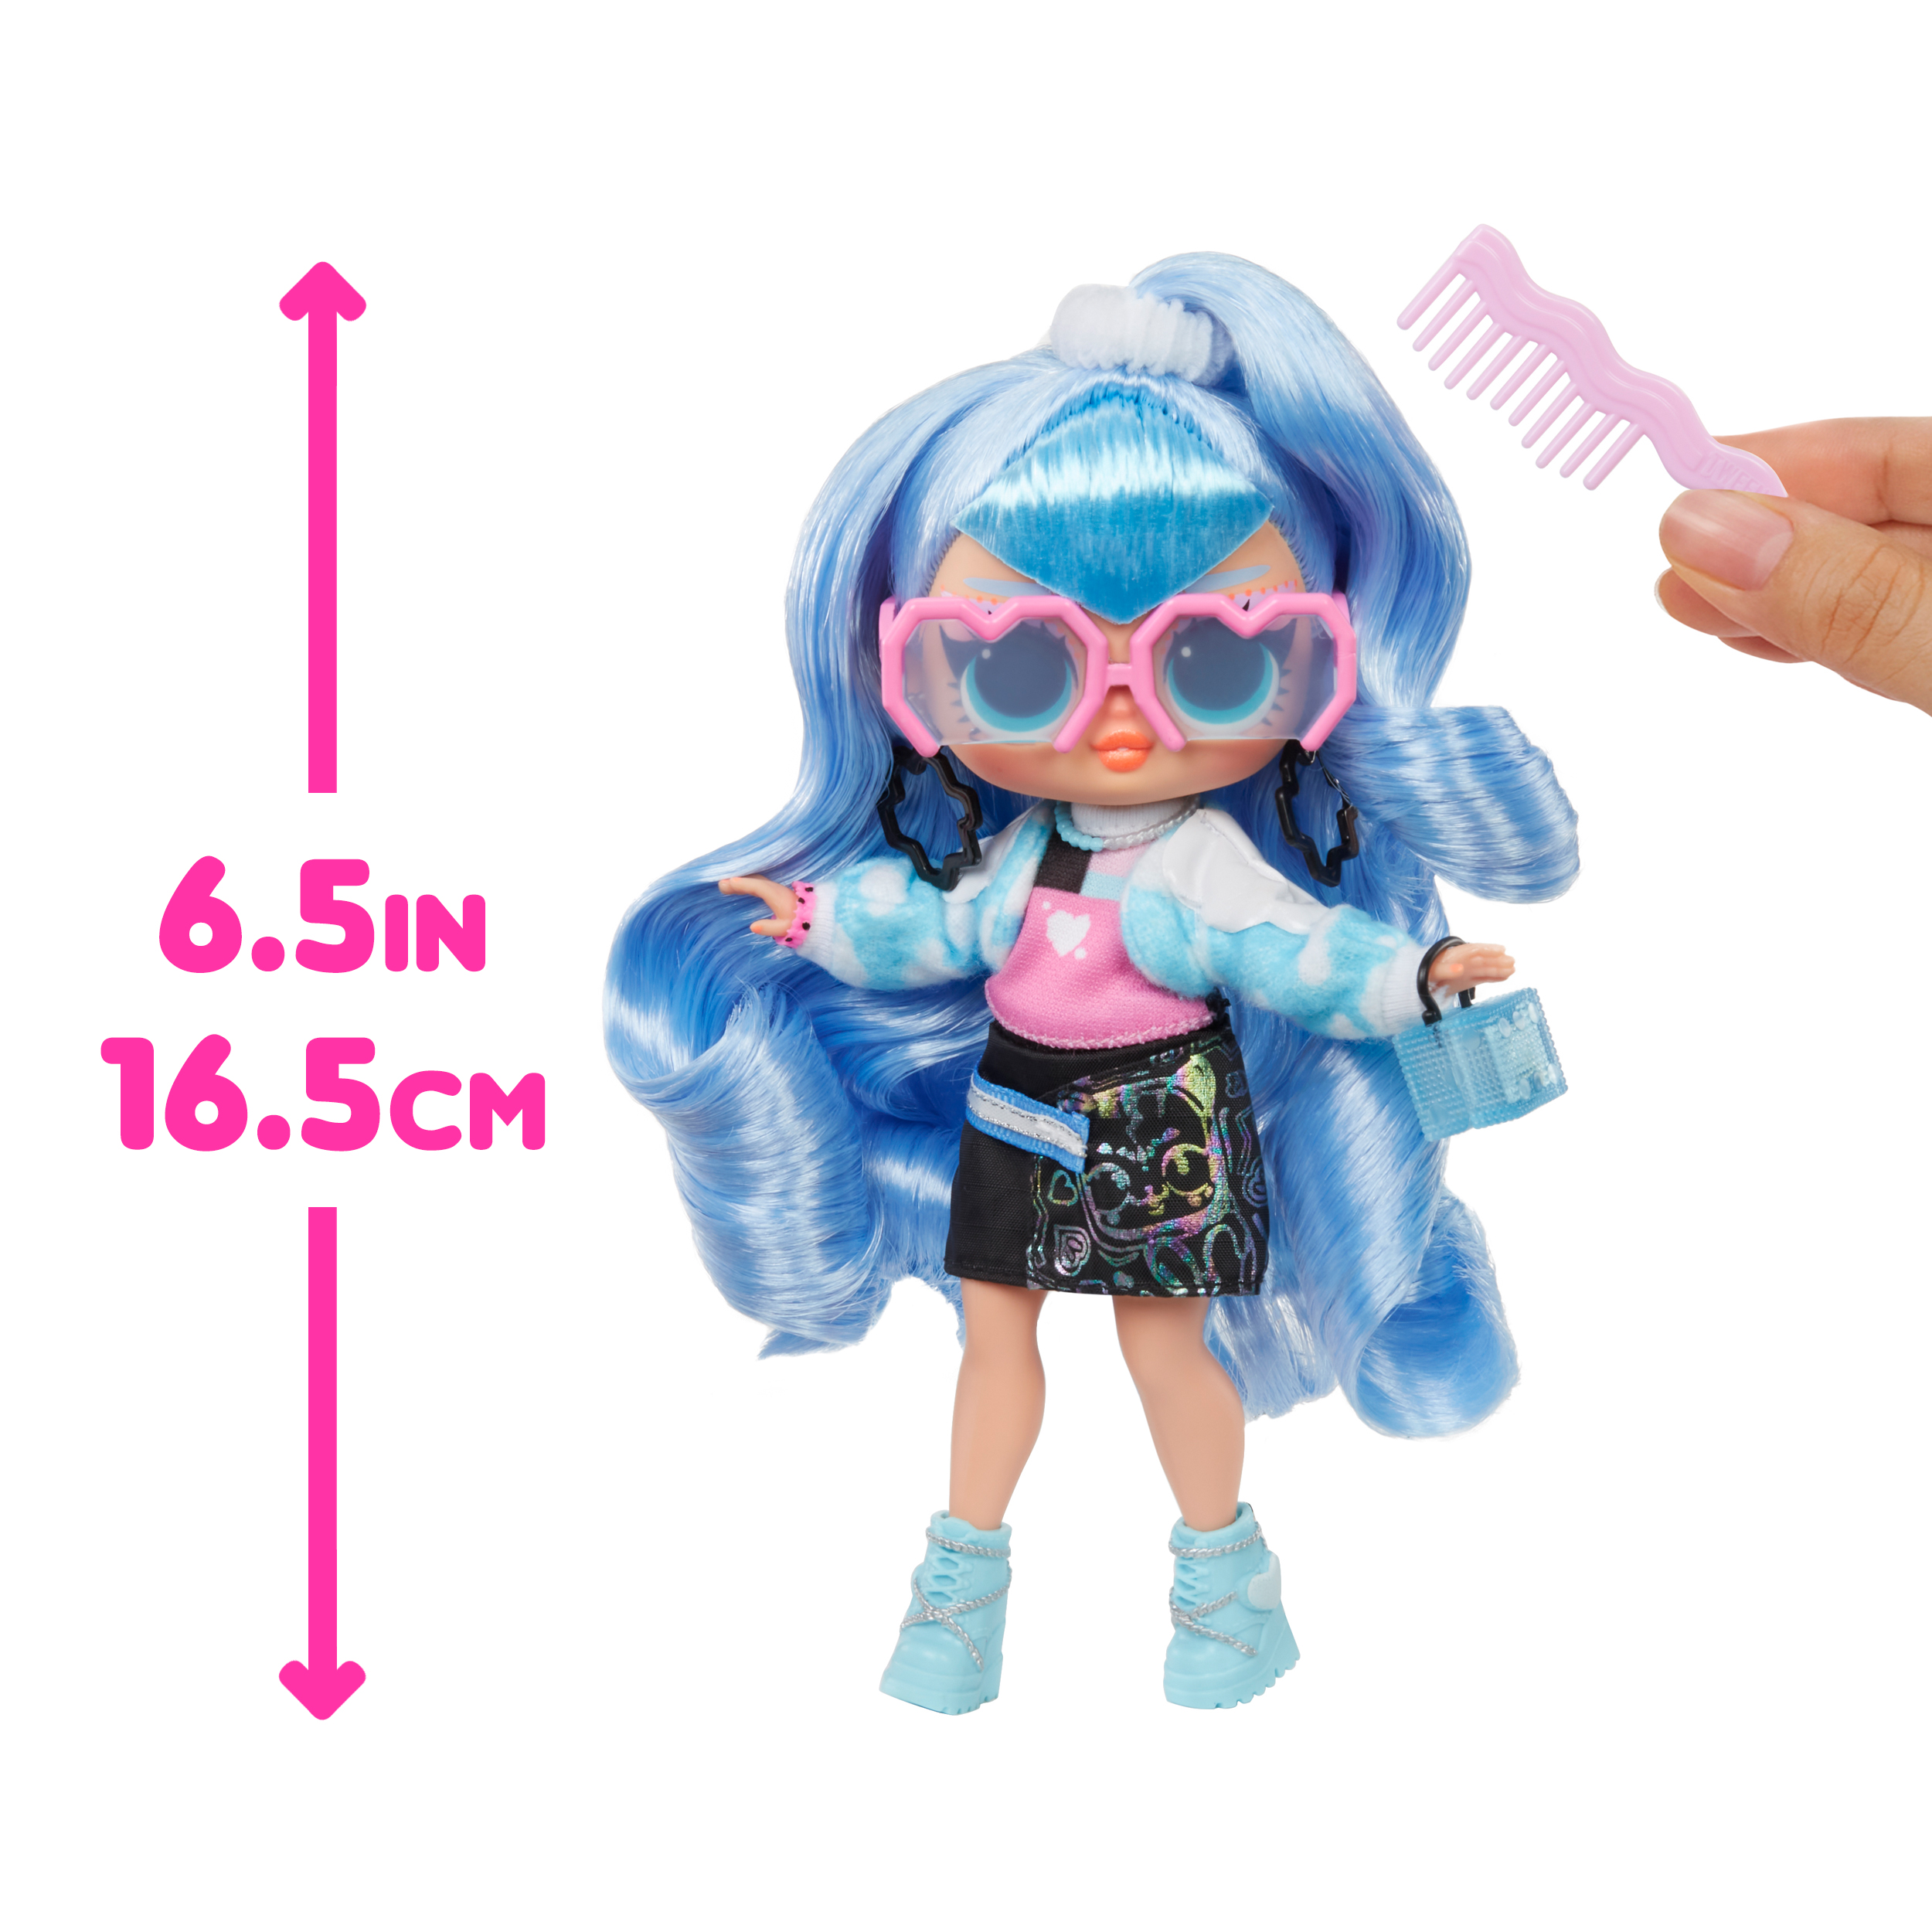 LOL Surprise Tweens Fashion Doll Ellie Fly with 10+ Surprises, Great Gift for Kids Ages 4+ - image 4 of 7